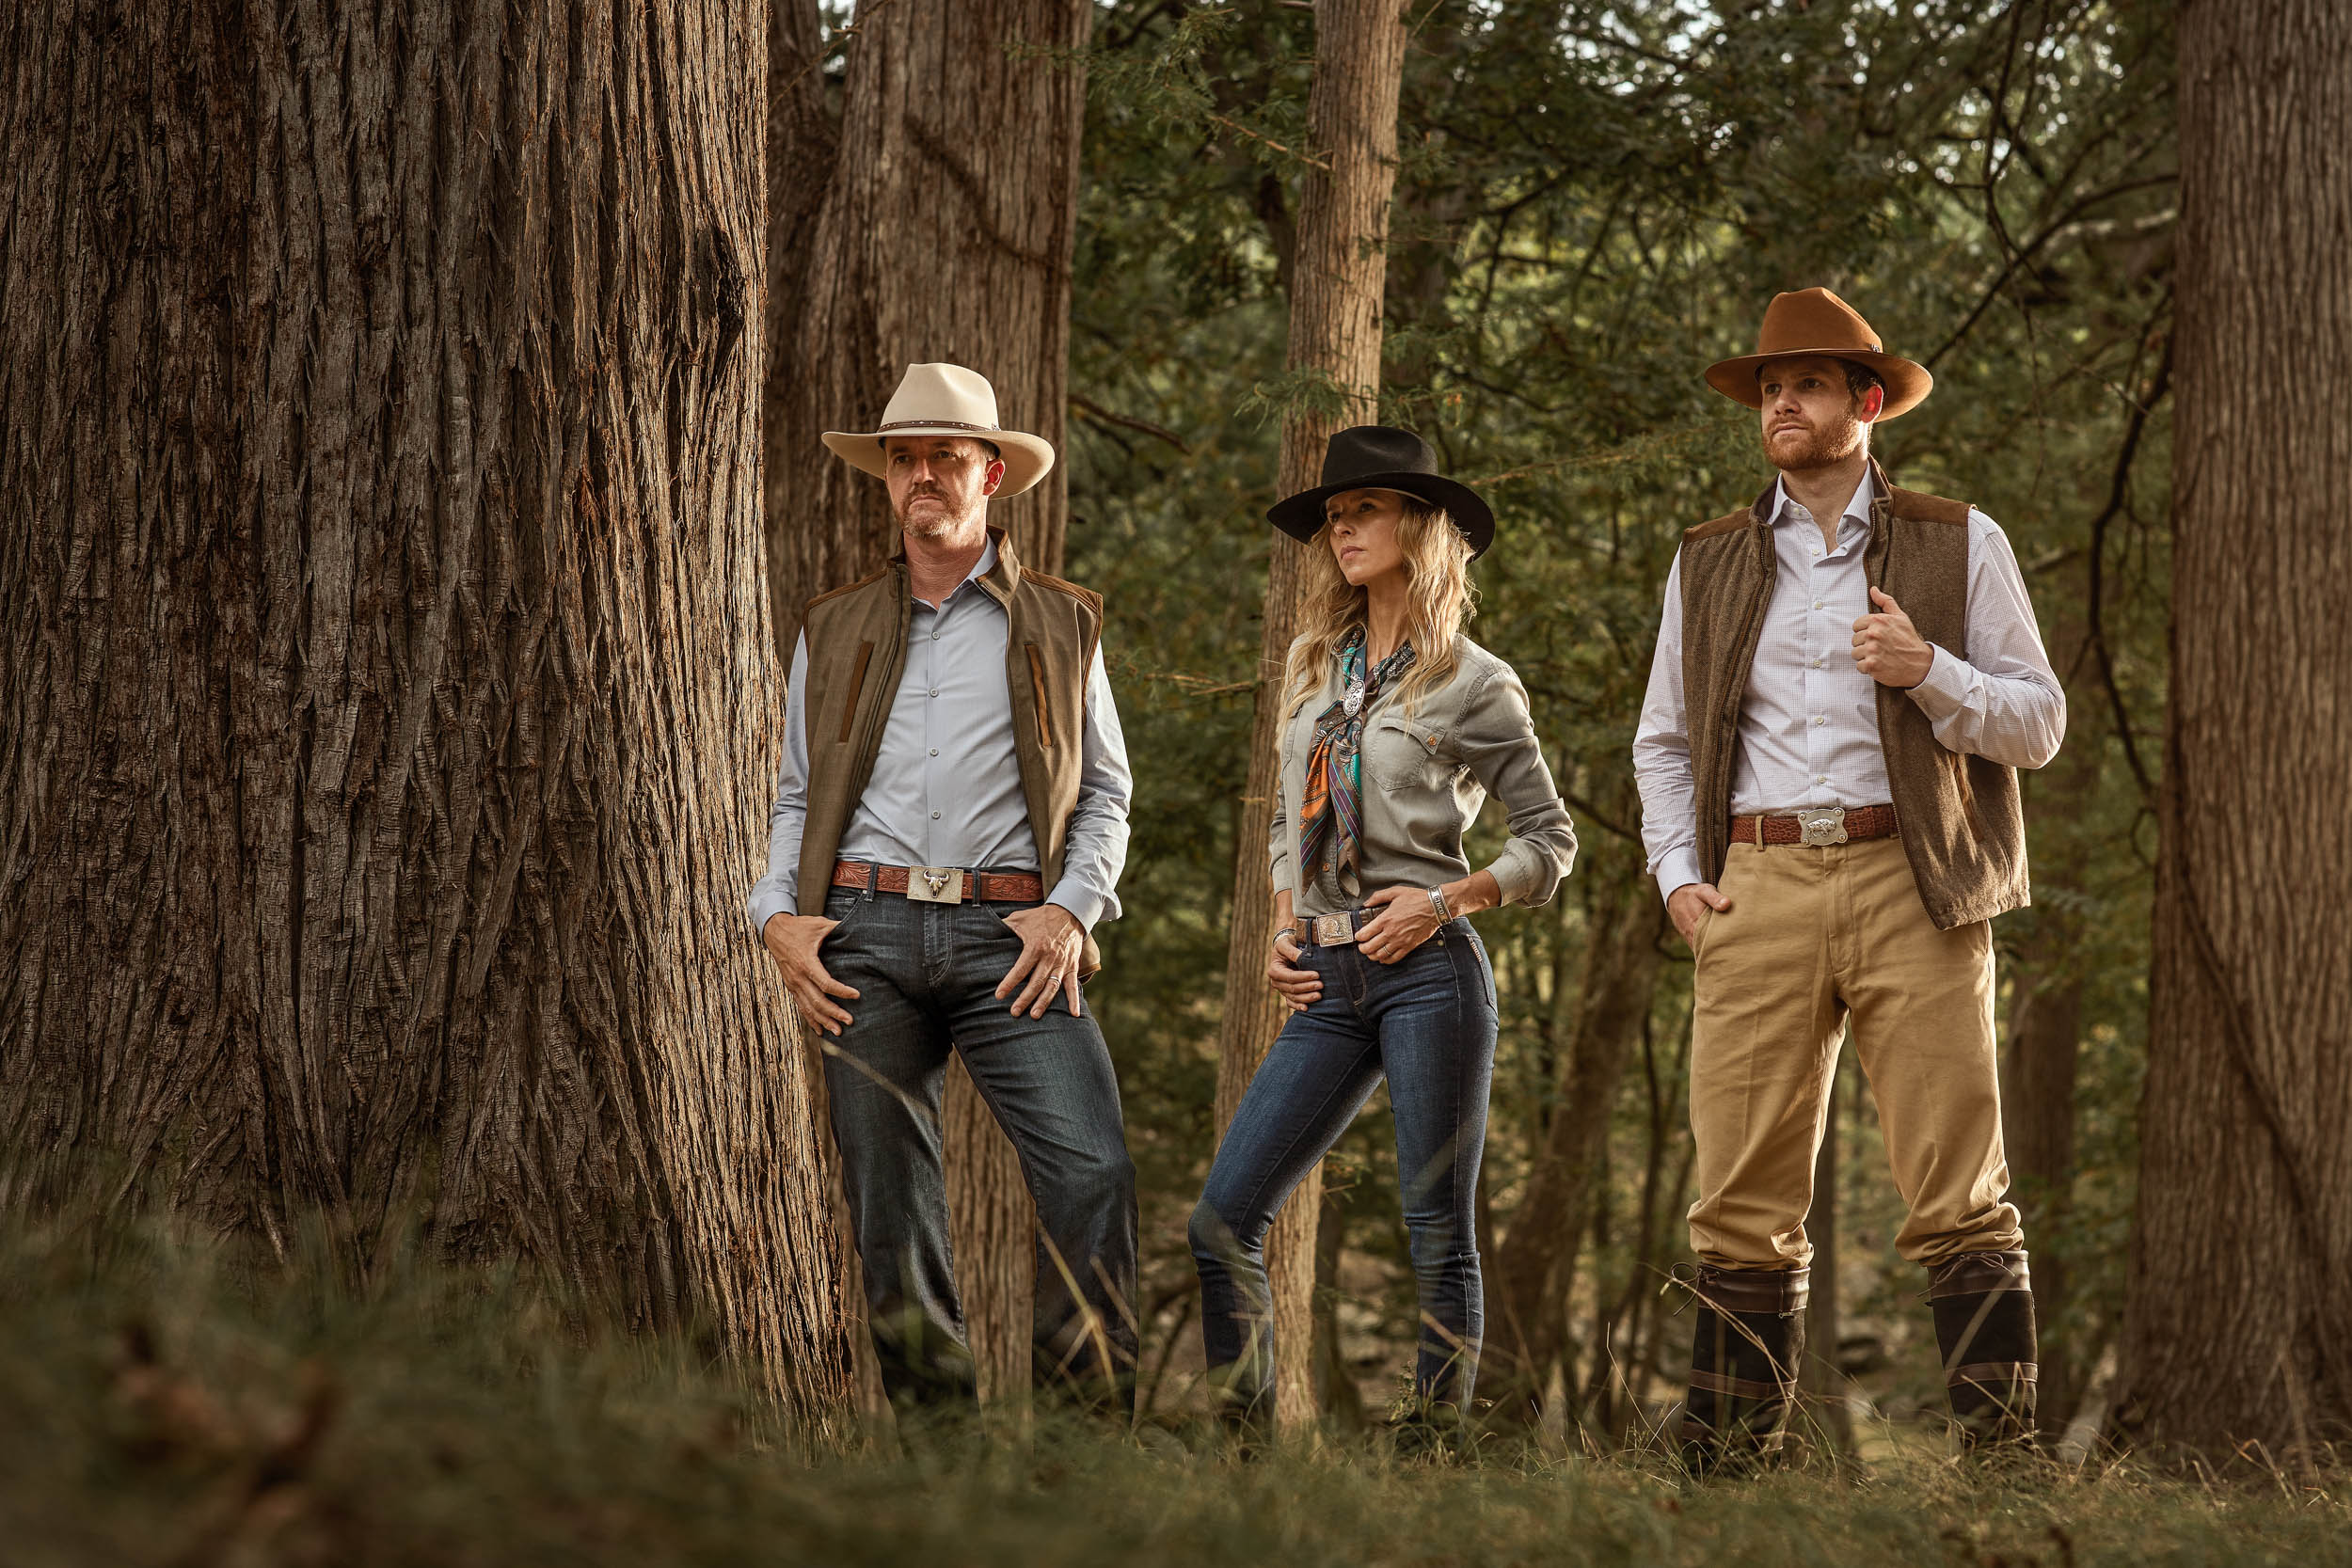 group of 3 people modeling western wear clothing in forest